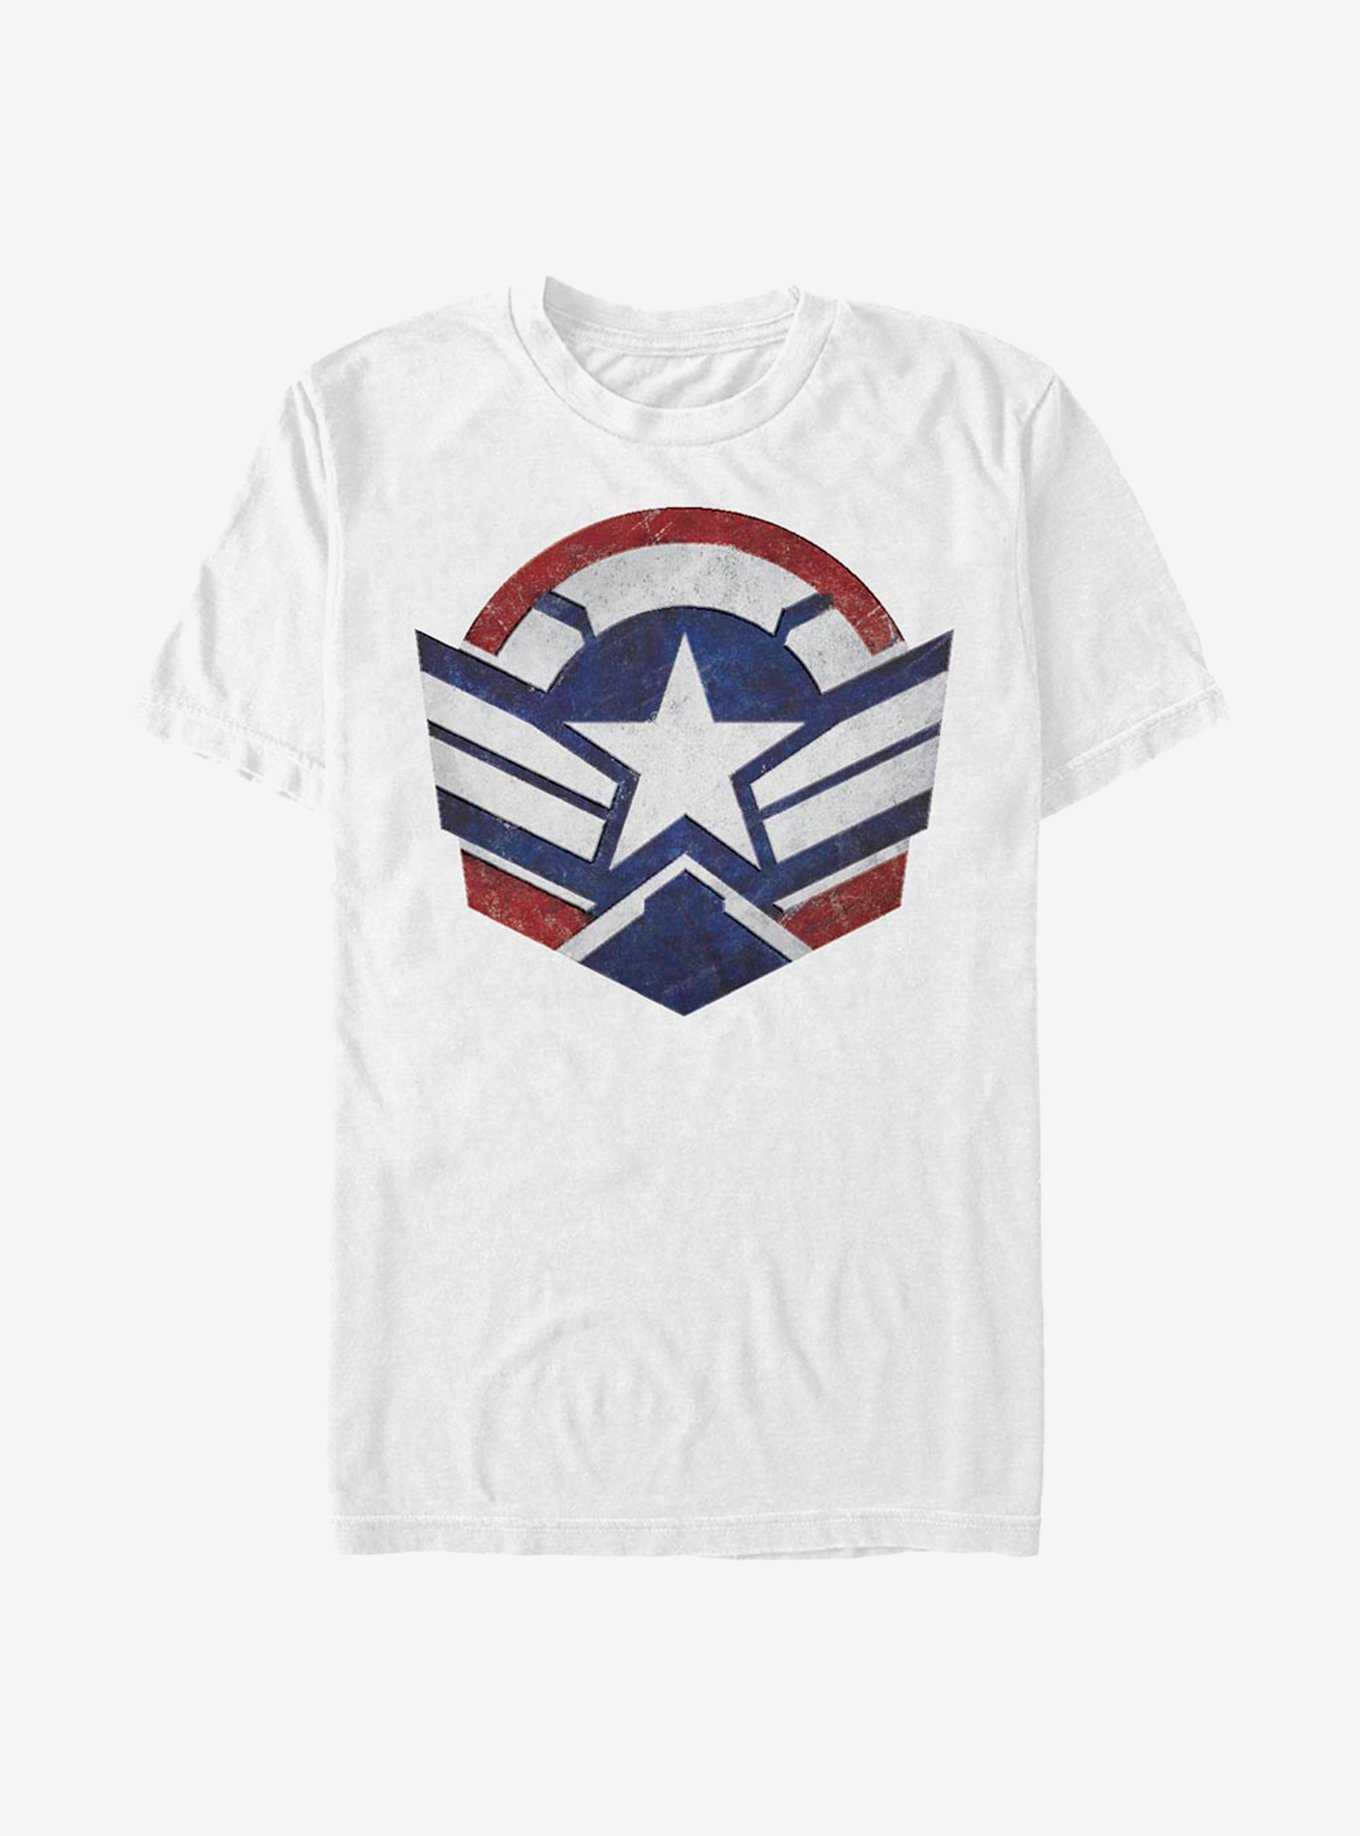 Marvel The Falcon And The Winter Soldier Captain America Symbol T-Shirt, , hi-res